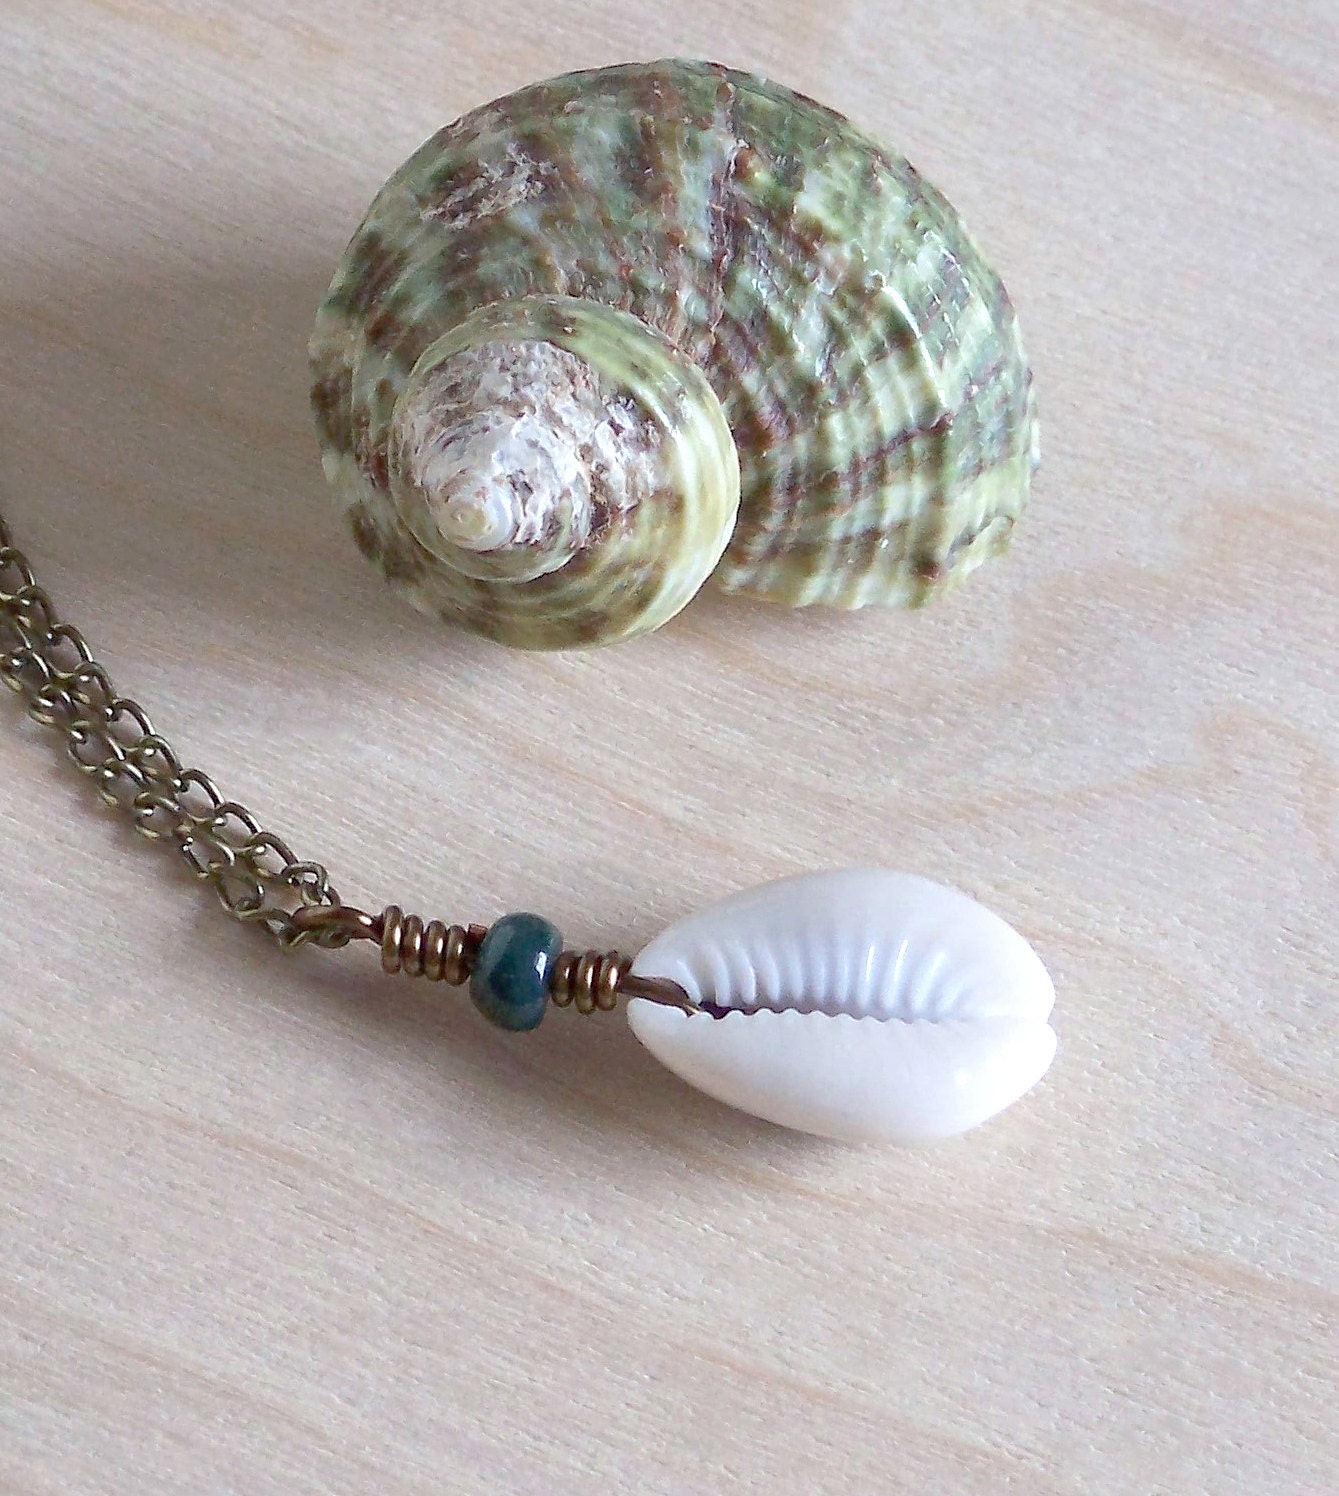 Agate and Cowrie Shell Necklace, Cowrie Shell Beach Necklace, Boho ...